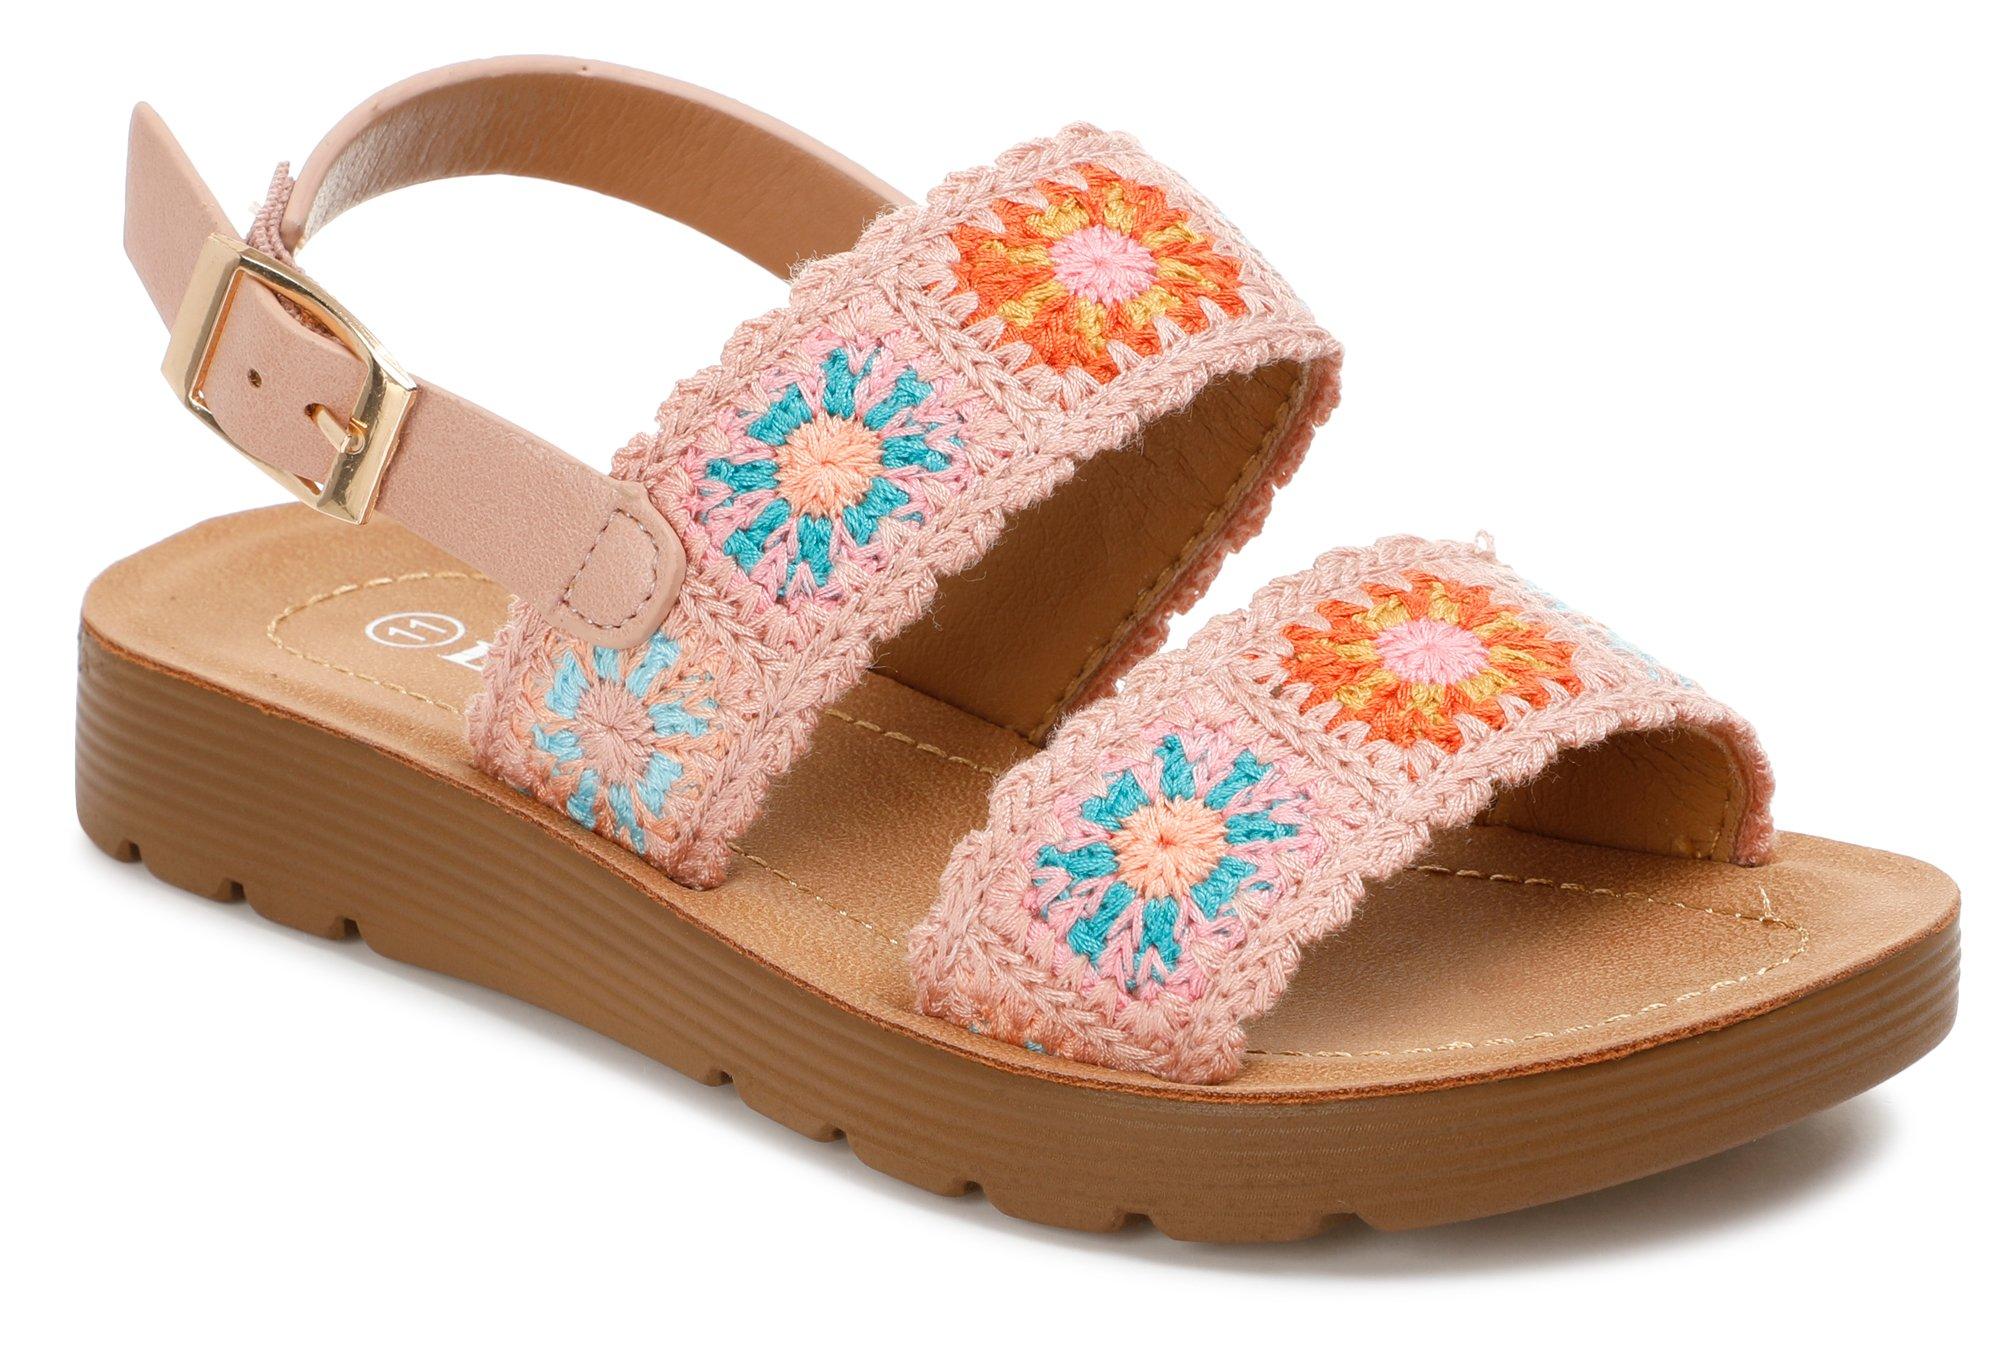 Girls Crocheted Floral Sandals